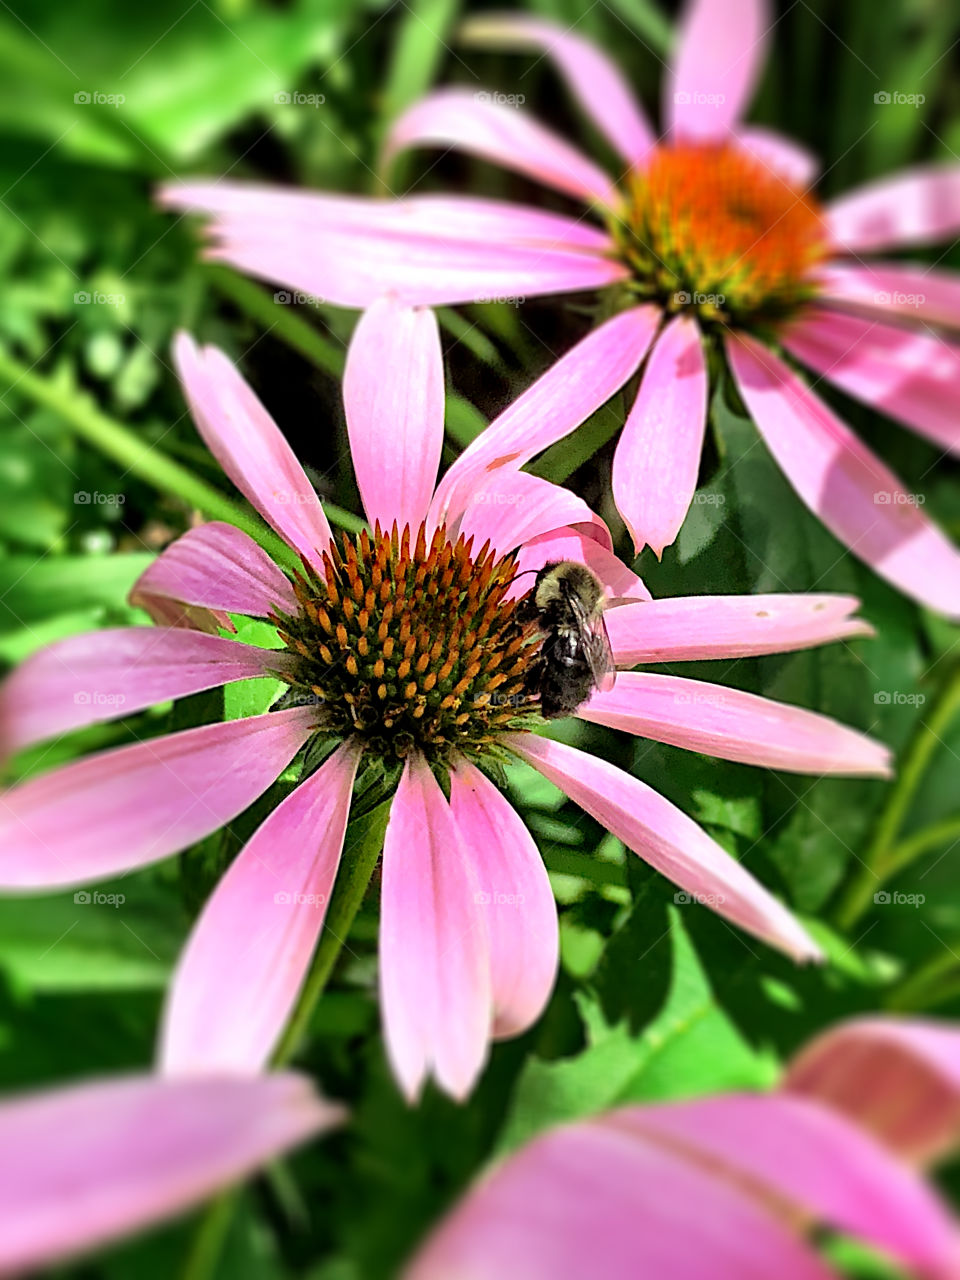 A bee pollinating a pink coneflower, also known as an Echinacea flower. These perennials usually bloom in late summer and are frequented by bees and butterflies. ~ @scorpiol13 